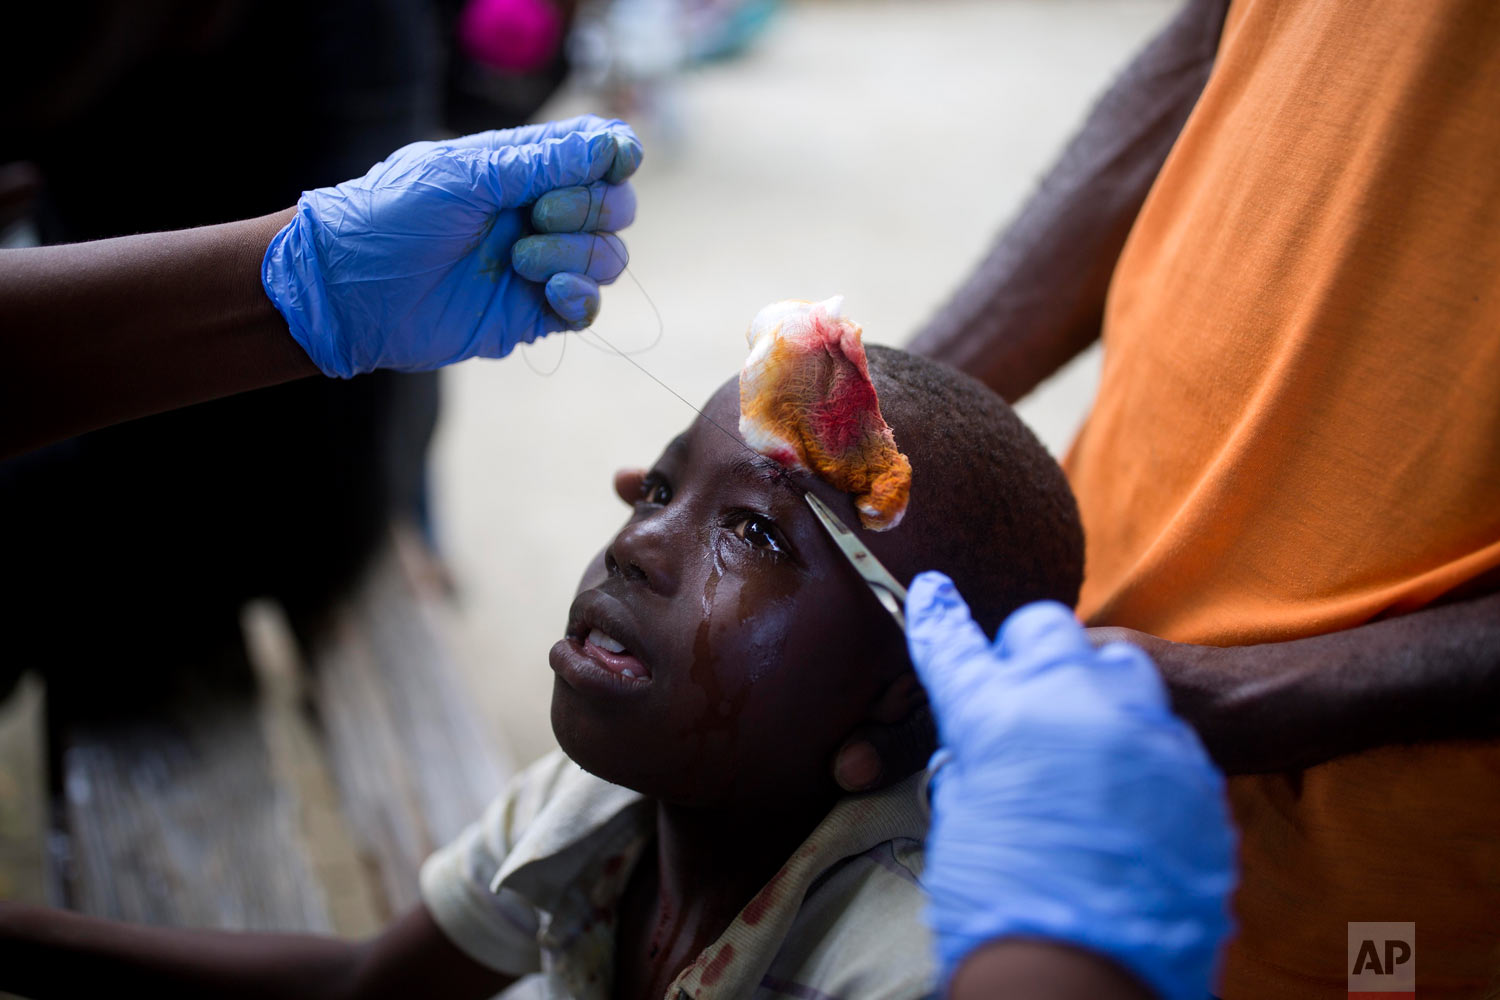  A boy who was injured by an aftershock receives treatment at the general hospital in Port-de-Paix, Haiti, Oct. 7, 2018. A magnitude 5.2 aftershock struck Haiti on Sunday, even as survivors of the previous day's temblor were sifting through the rubbl